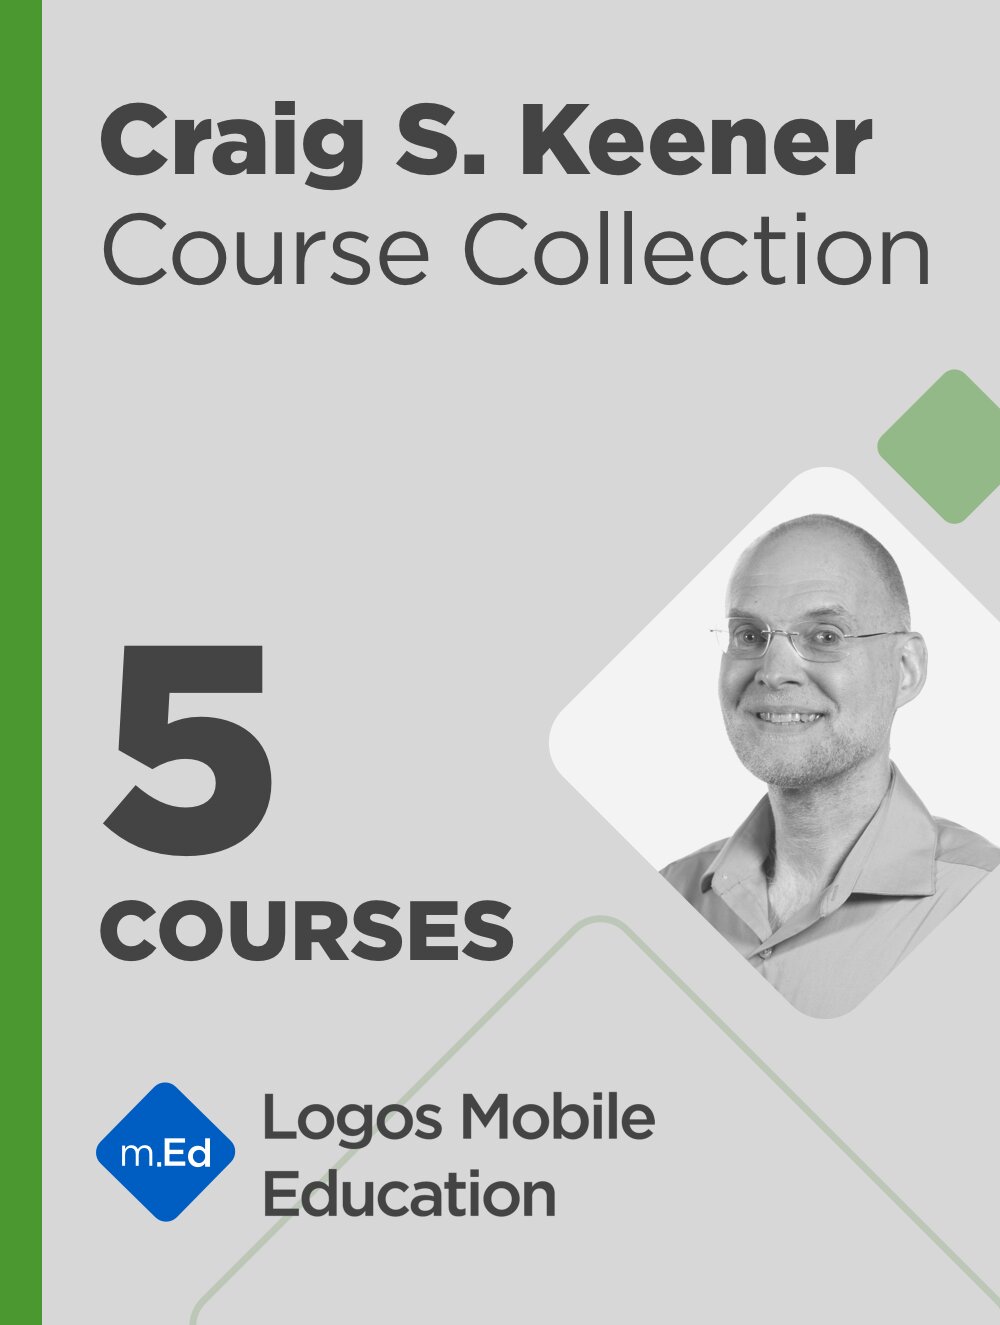 Craig S. Keener Course Collection (5 courses)